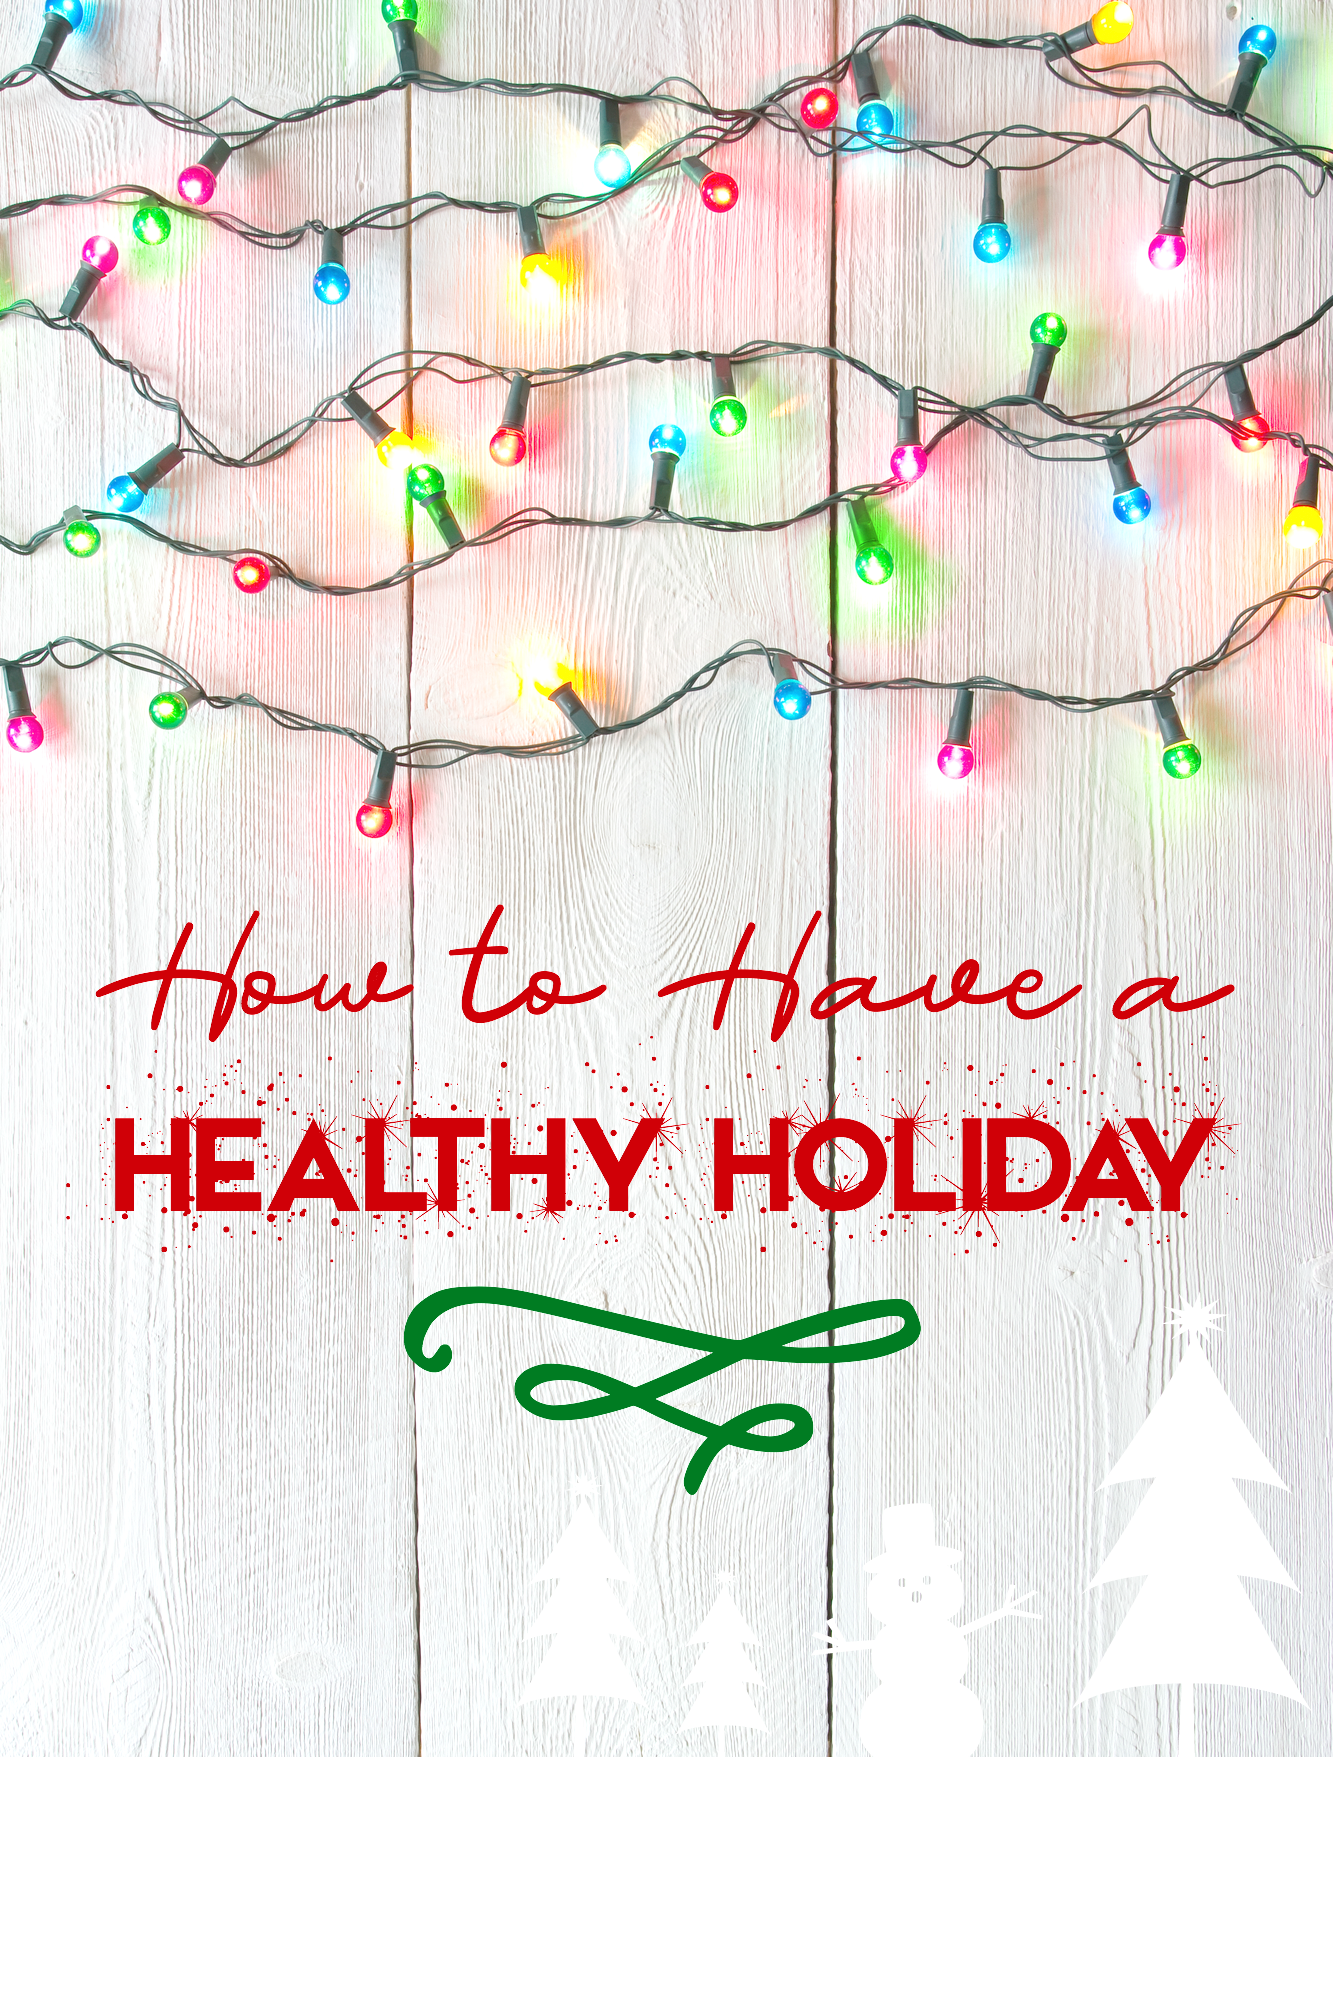 Do yourself a favor and follow these simple tips for how to have a healthy holiday.